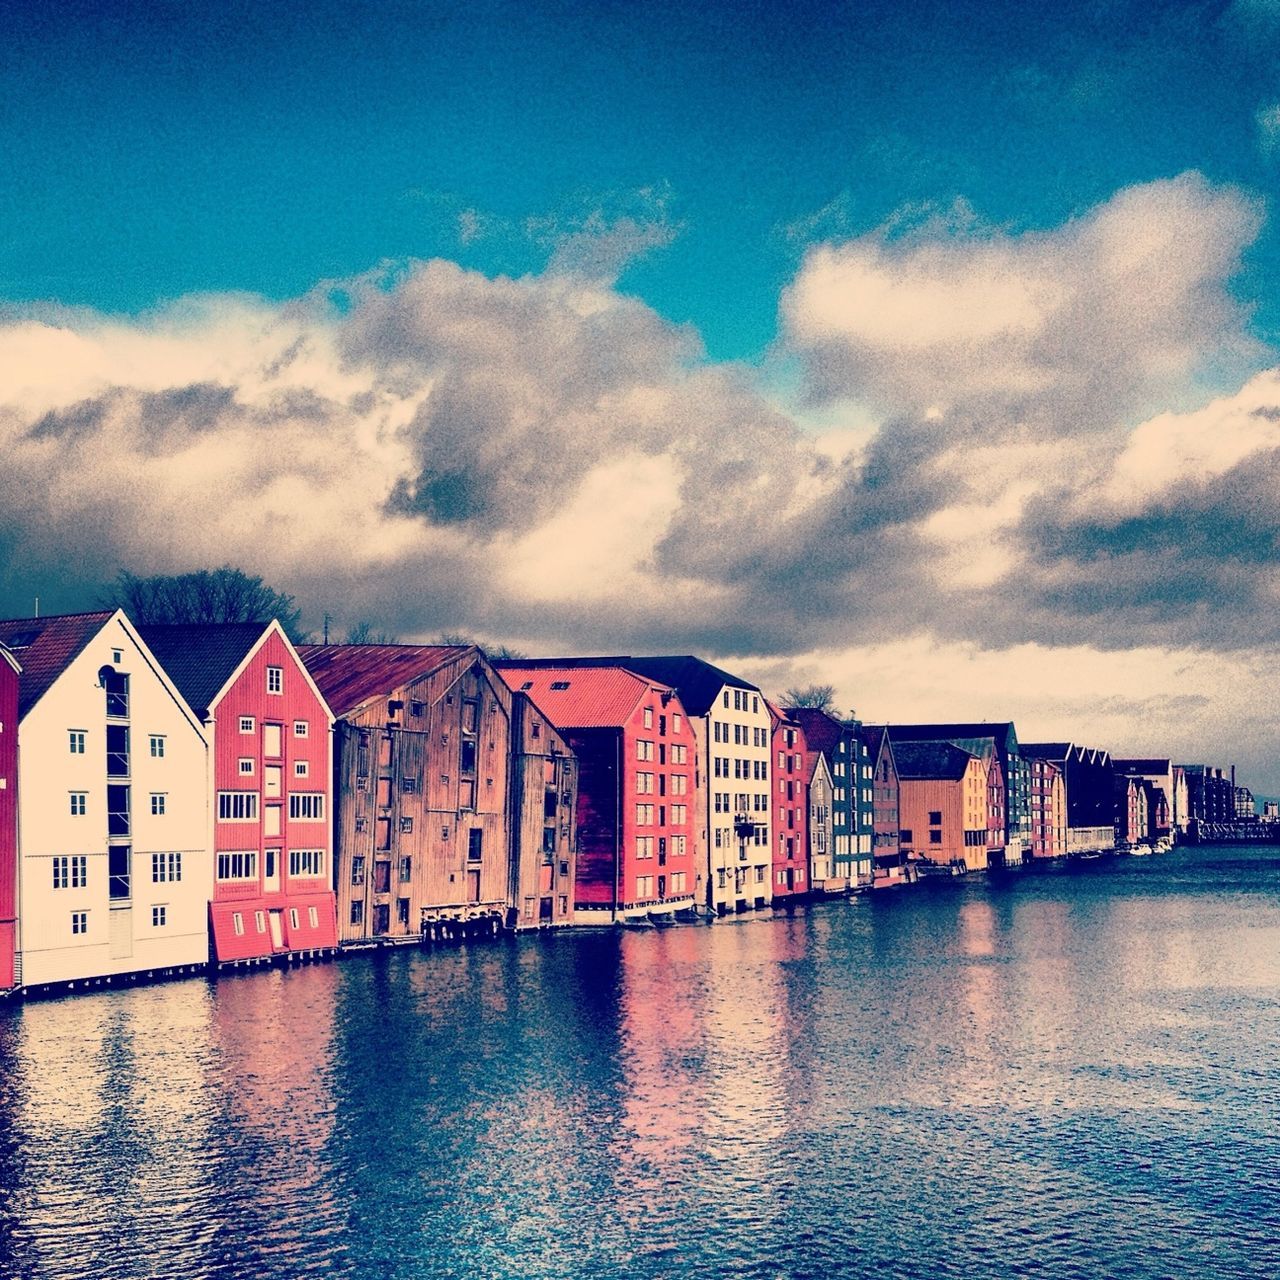 architecture, built structure, building exterior, sky, waterfront, water, cloud - sky, cloudy, residential structure, cloud, residential building, house, city, river, building, reflection, residential district, outdoors, no people, overcast